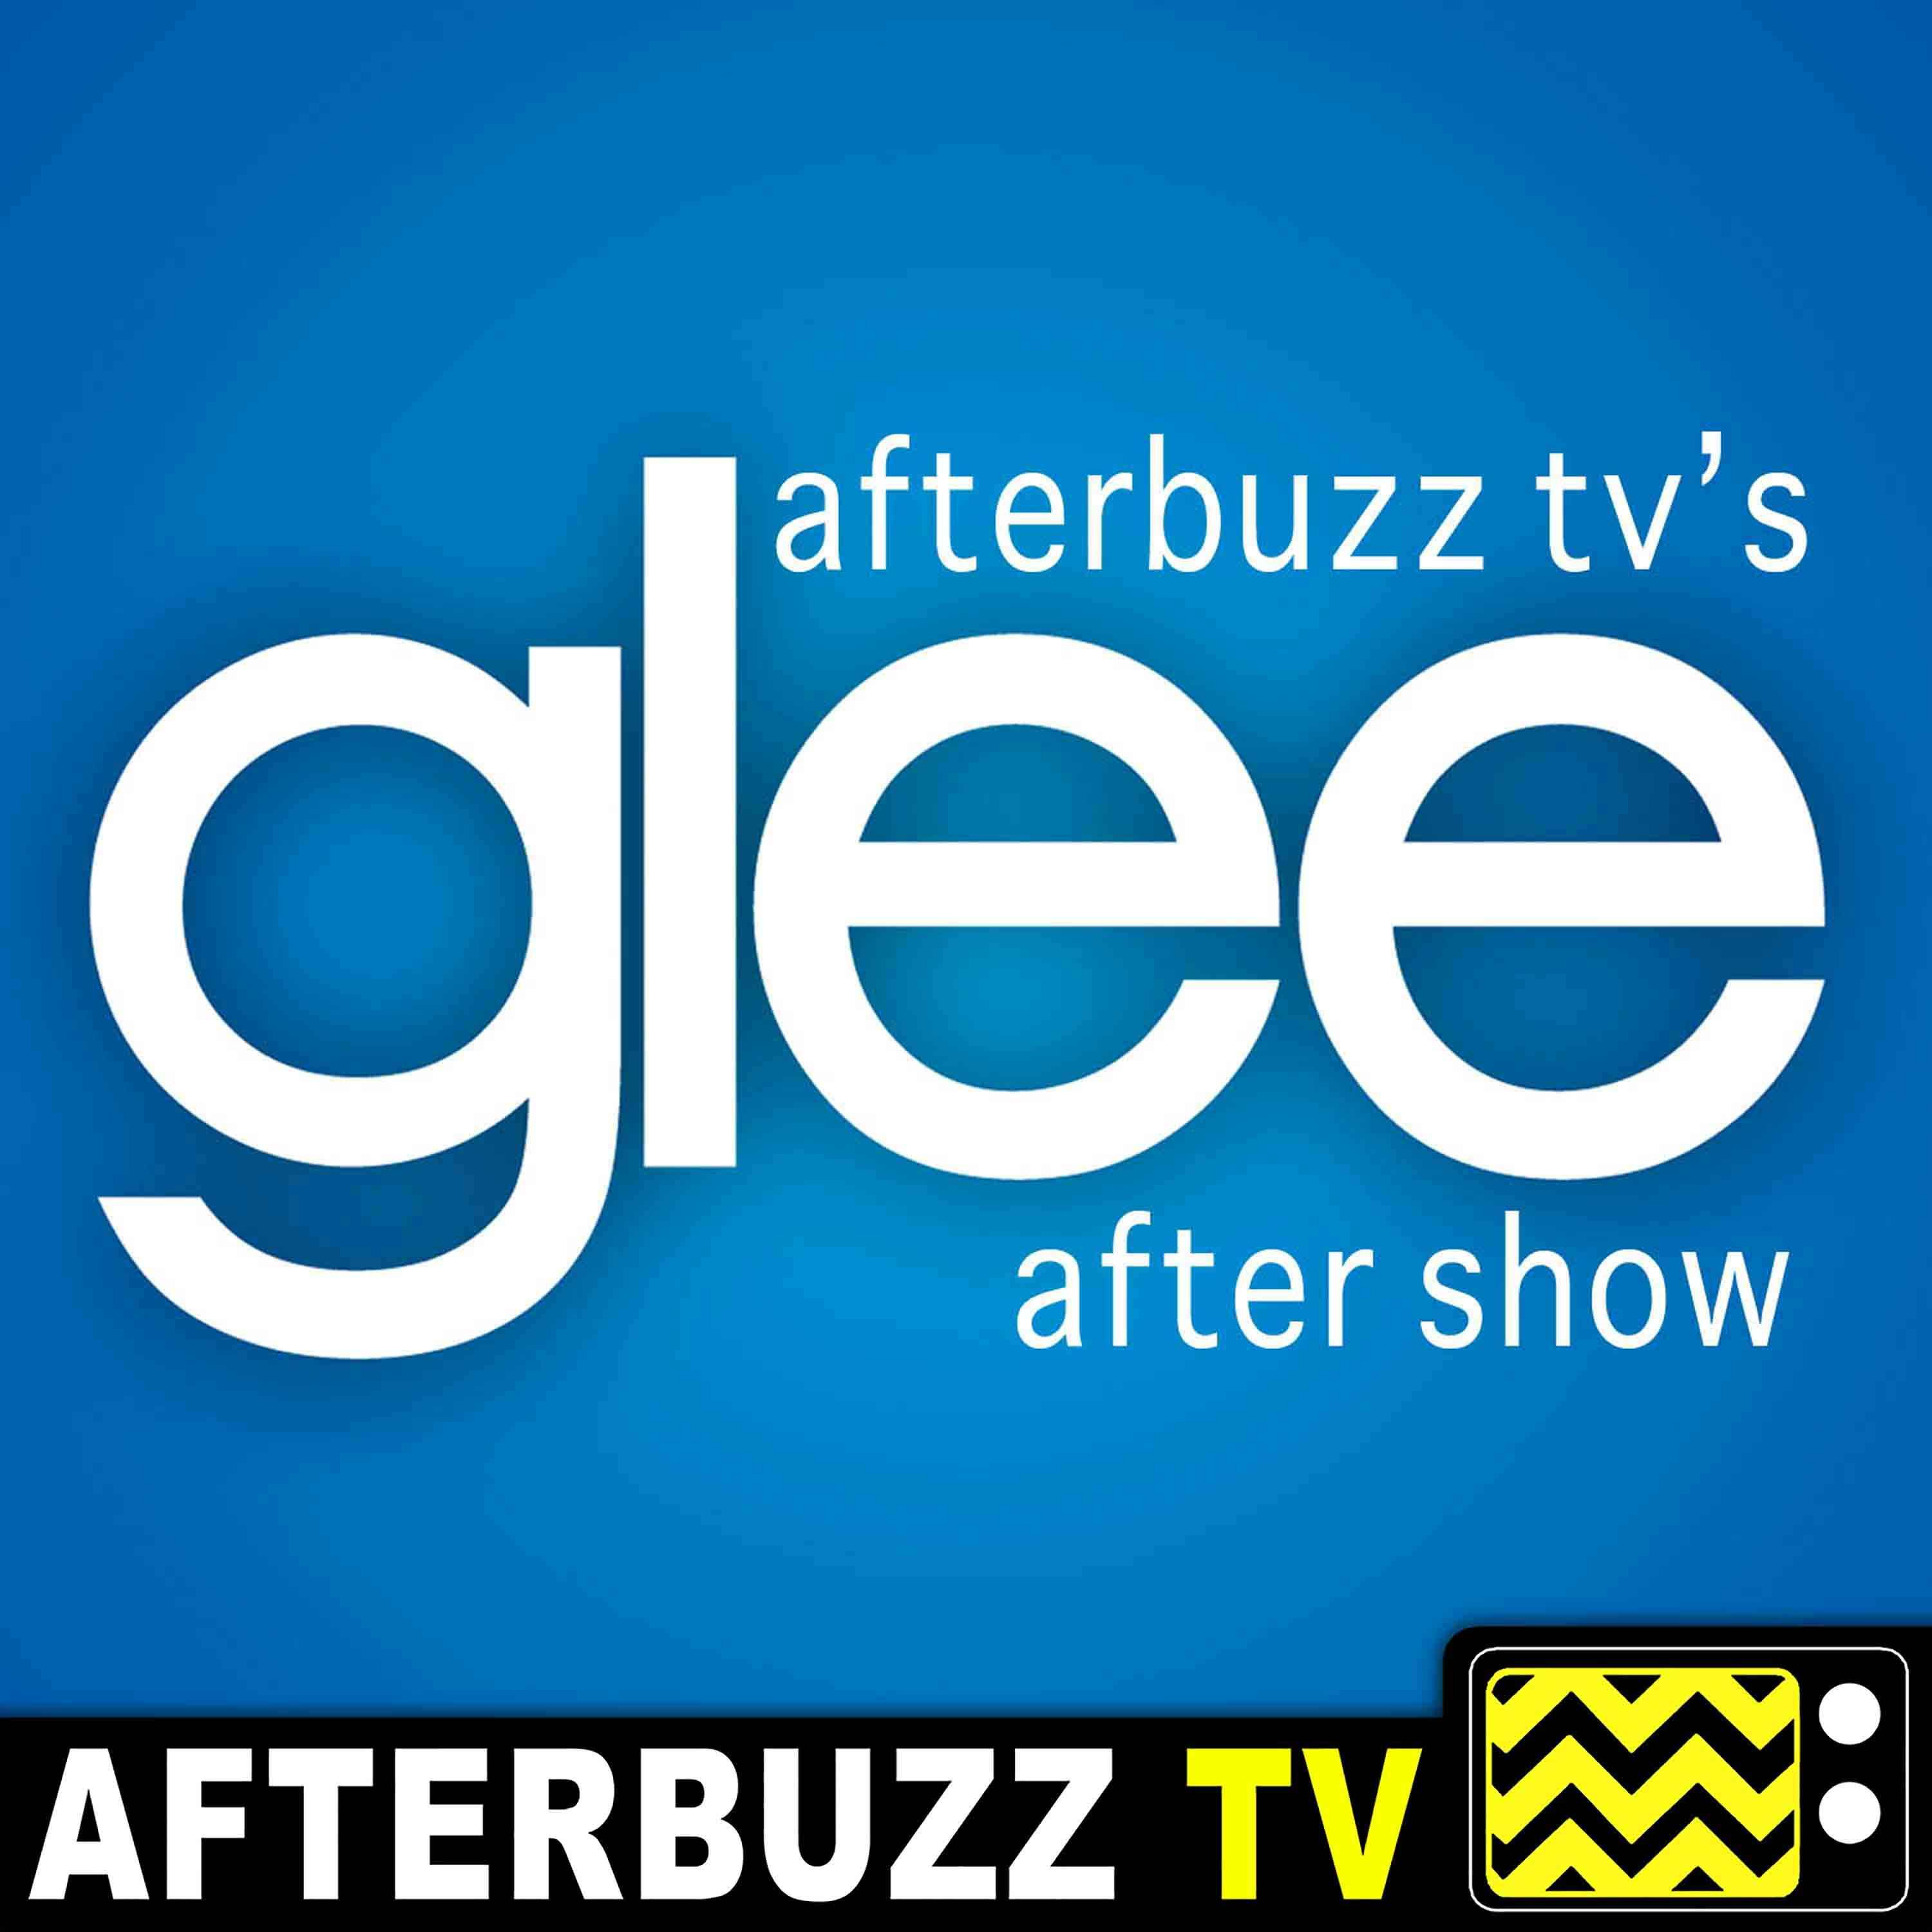 Glee S:5 | Tested E:16 | AfterBuzz TV AfterShow